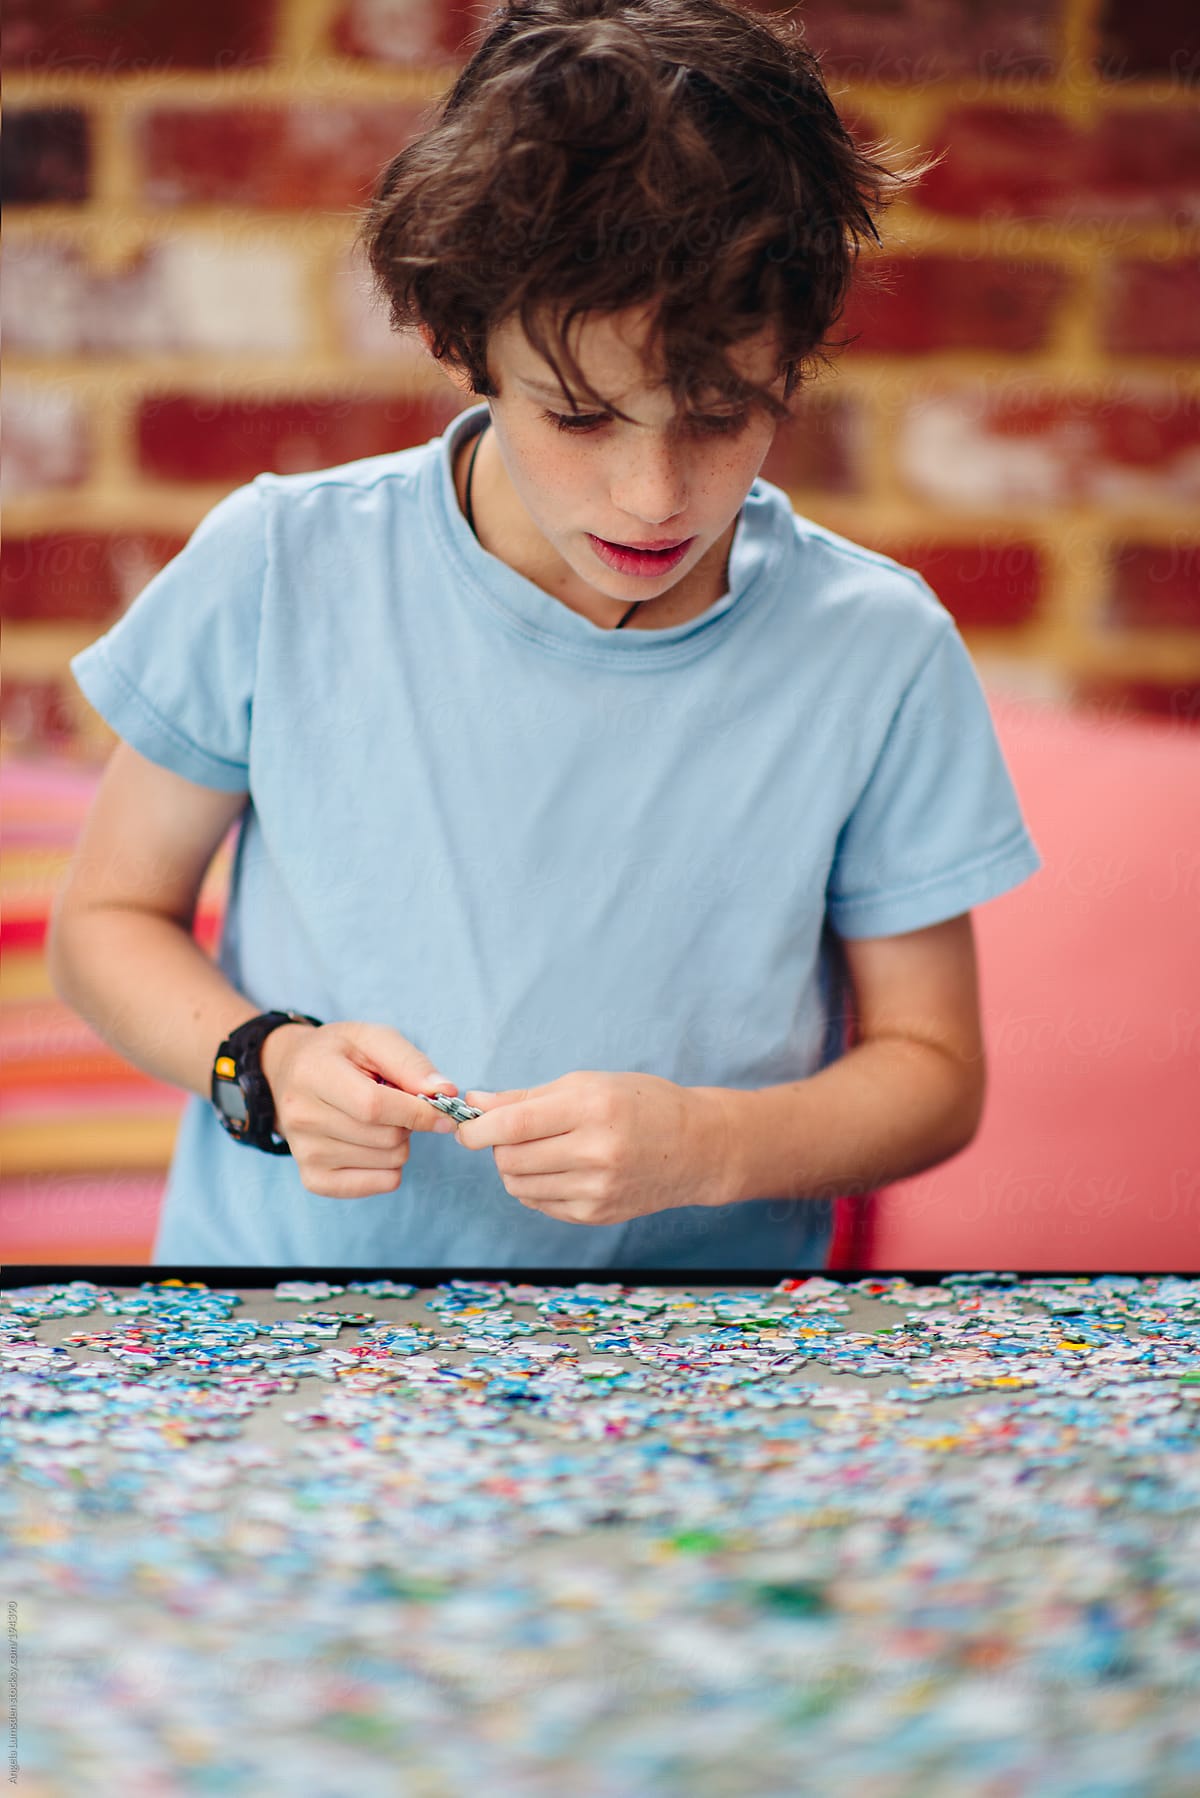 Boy working on a jigsaw puzzle outside